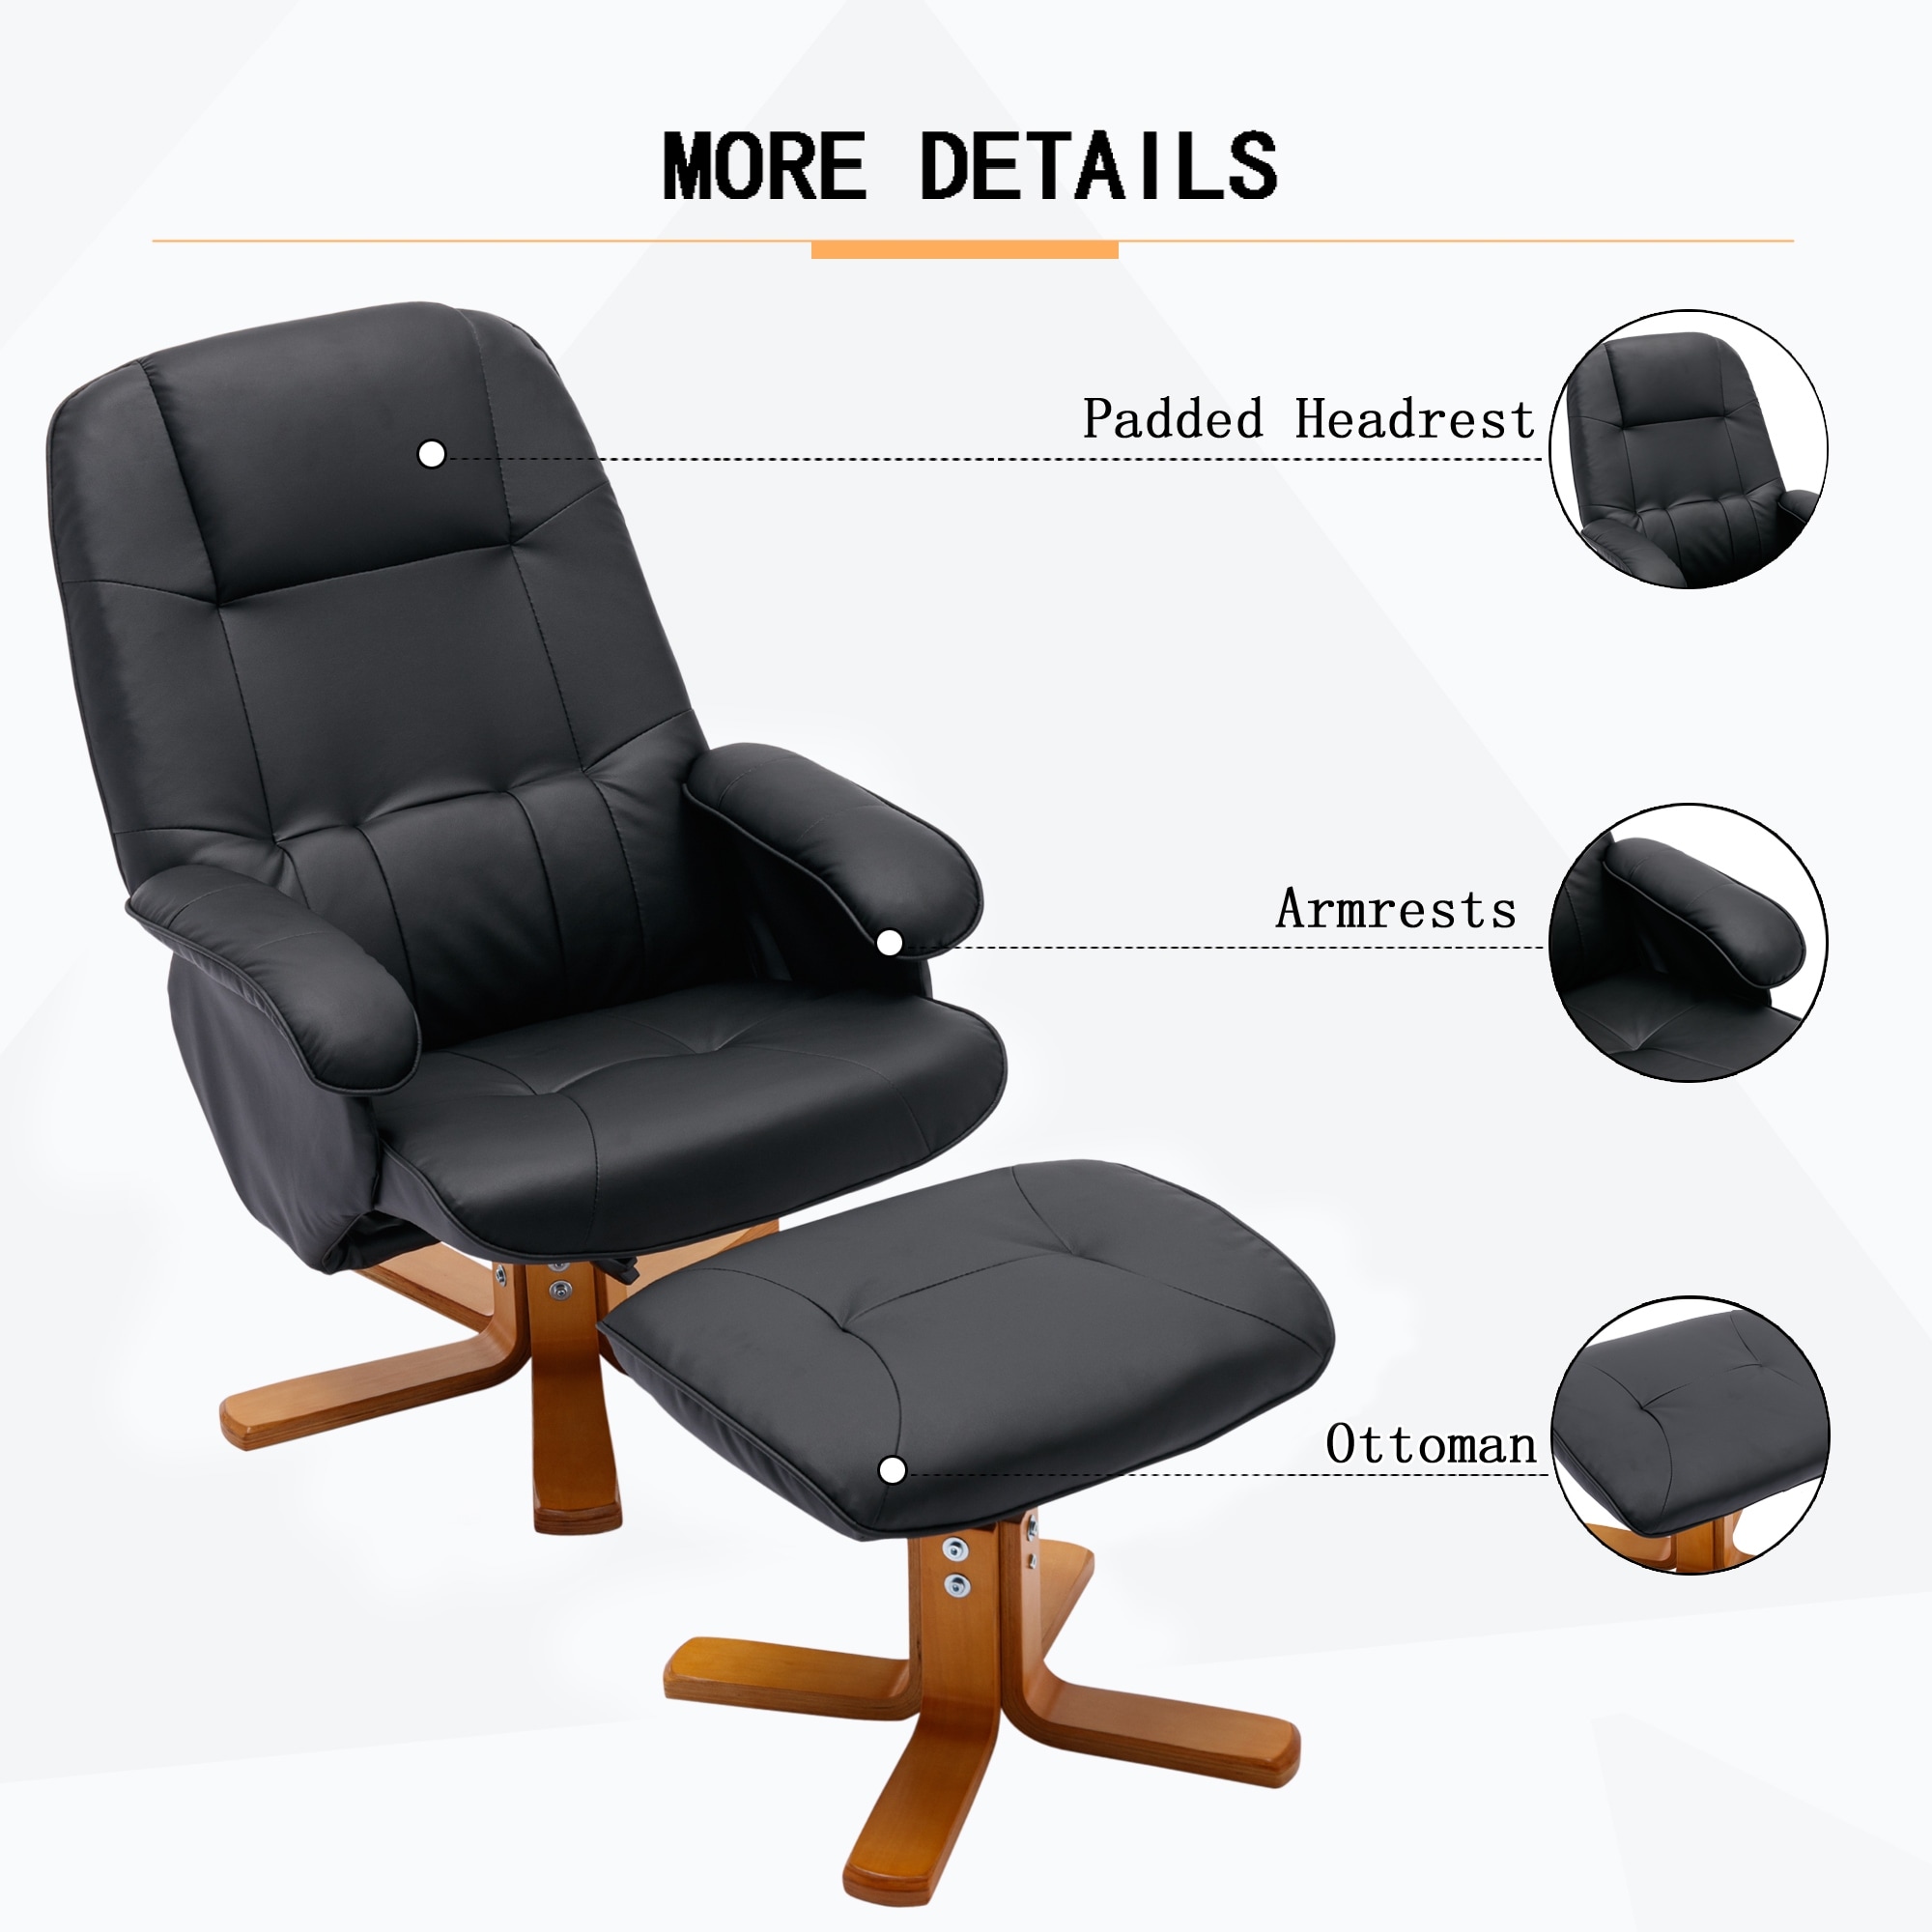 https://ak1.ostkcdn.com/images/products/is/images/direct/0382d15412b2a4554b683162b95632172b760e70/Leather-Upholstered-Swivel-Recliner-Chair-with-Wood-Base-and-Ottoman.jpg